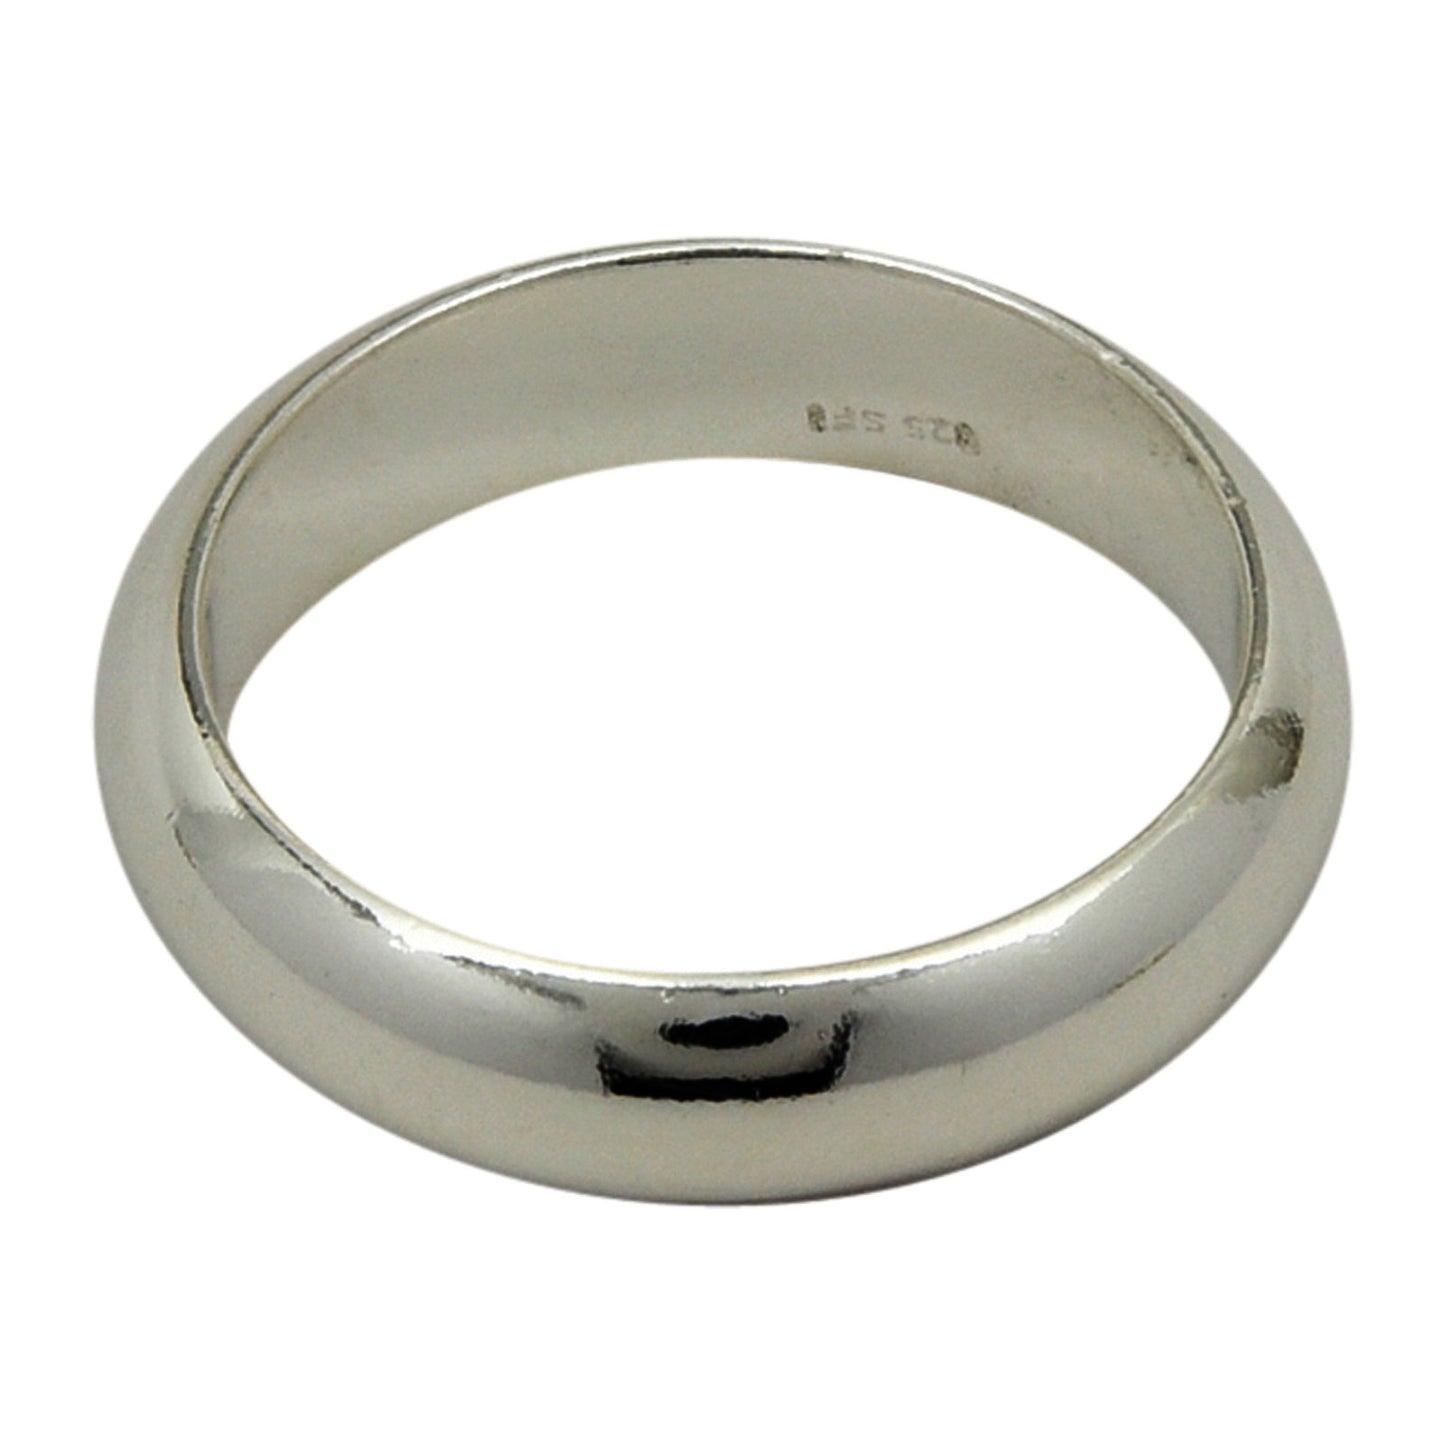 Sterling Silver 5mm Plain Half Round Wedding Band Ring Sizes 4-15